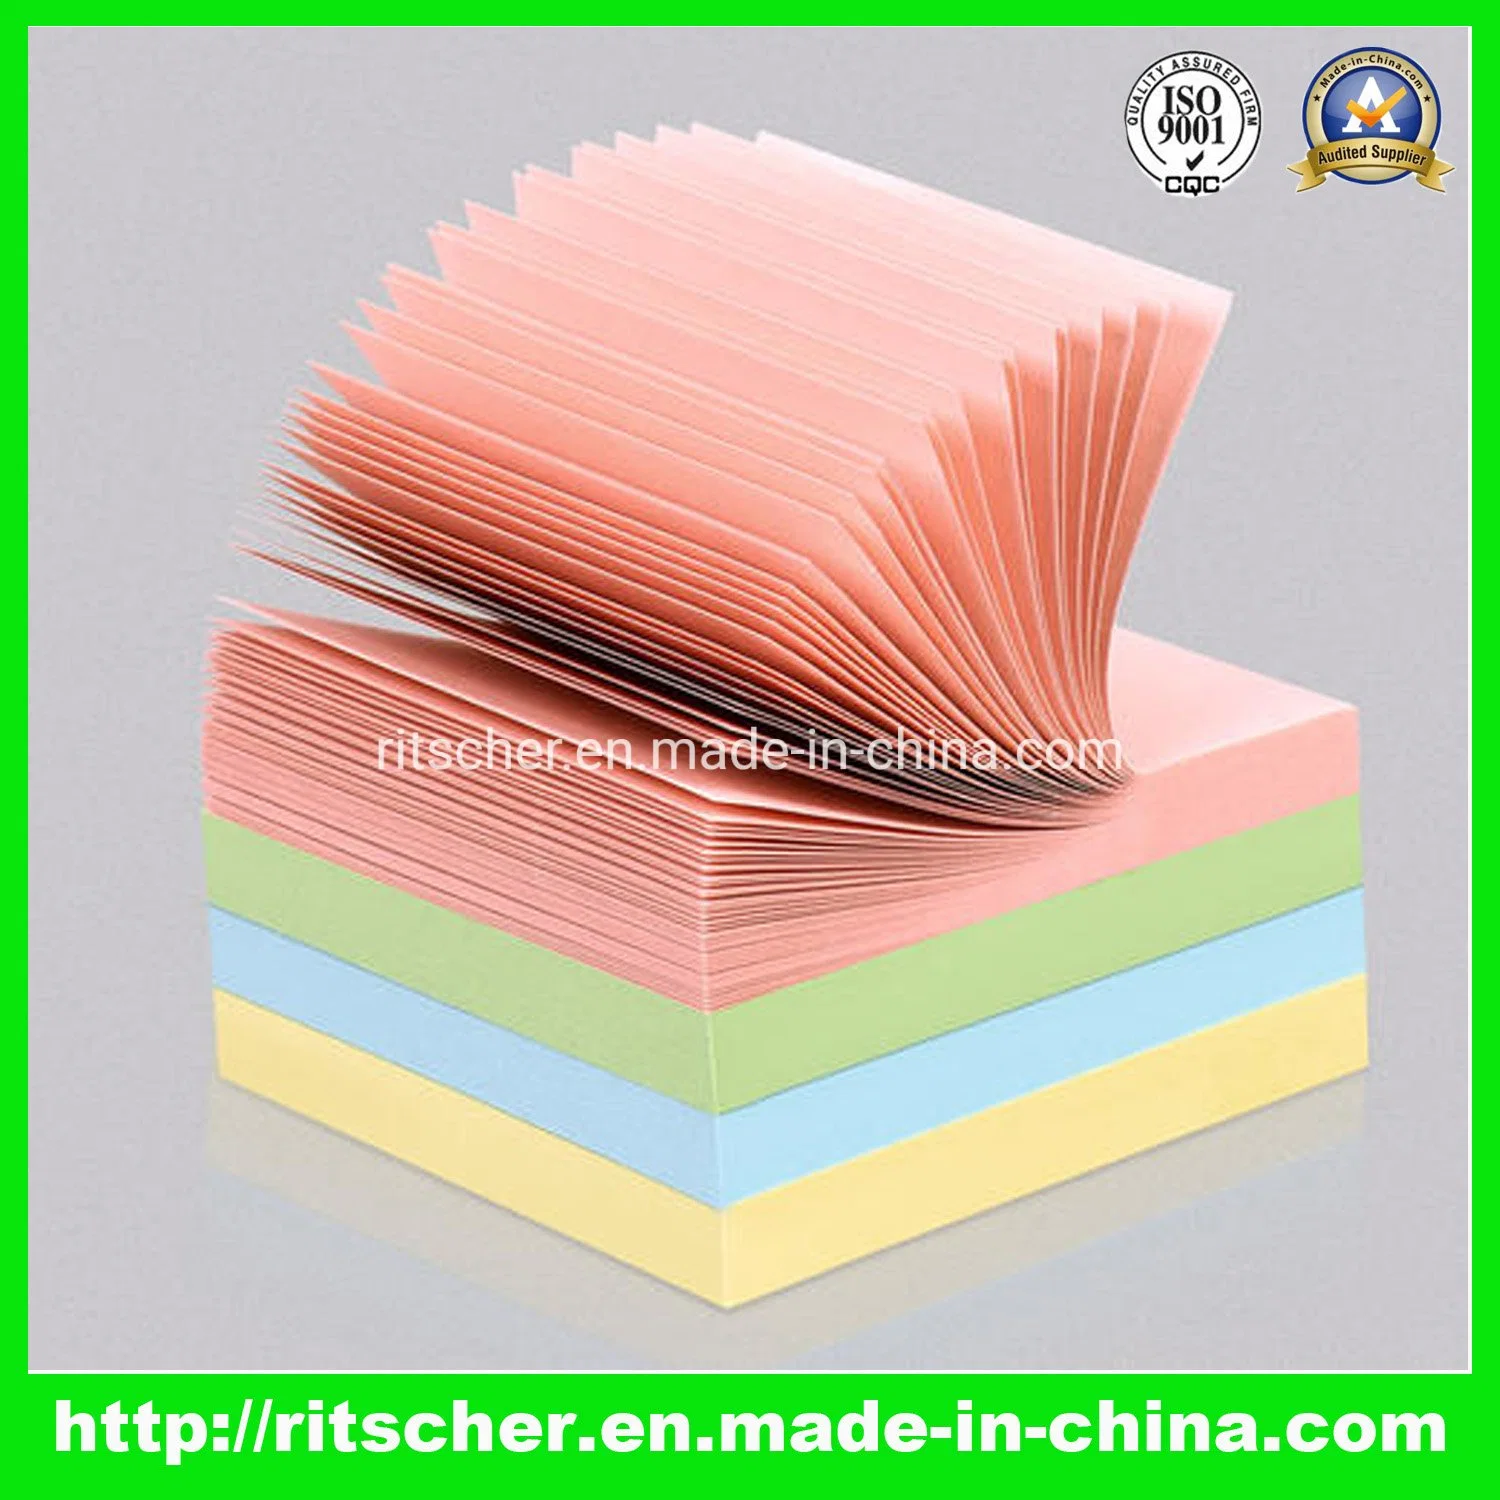 Office Supply Wholesale/Supplier Stationery and School/Office Stationery